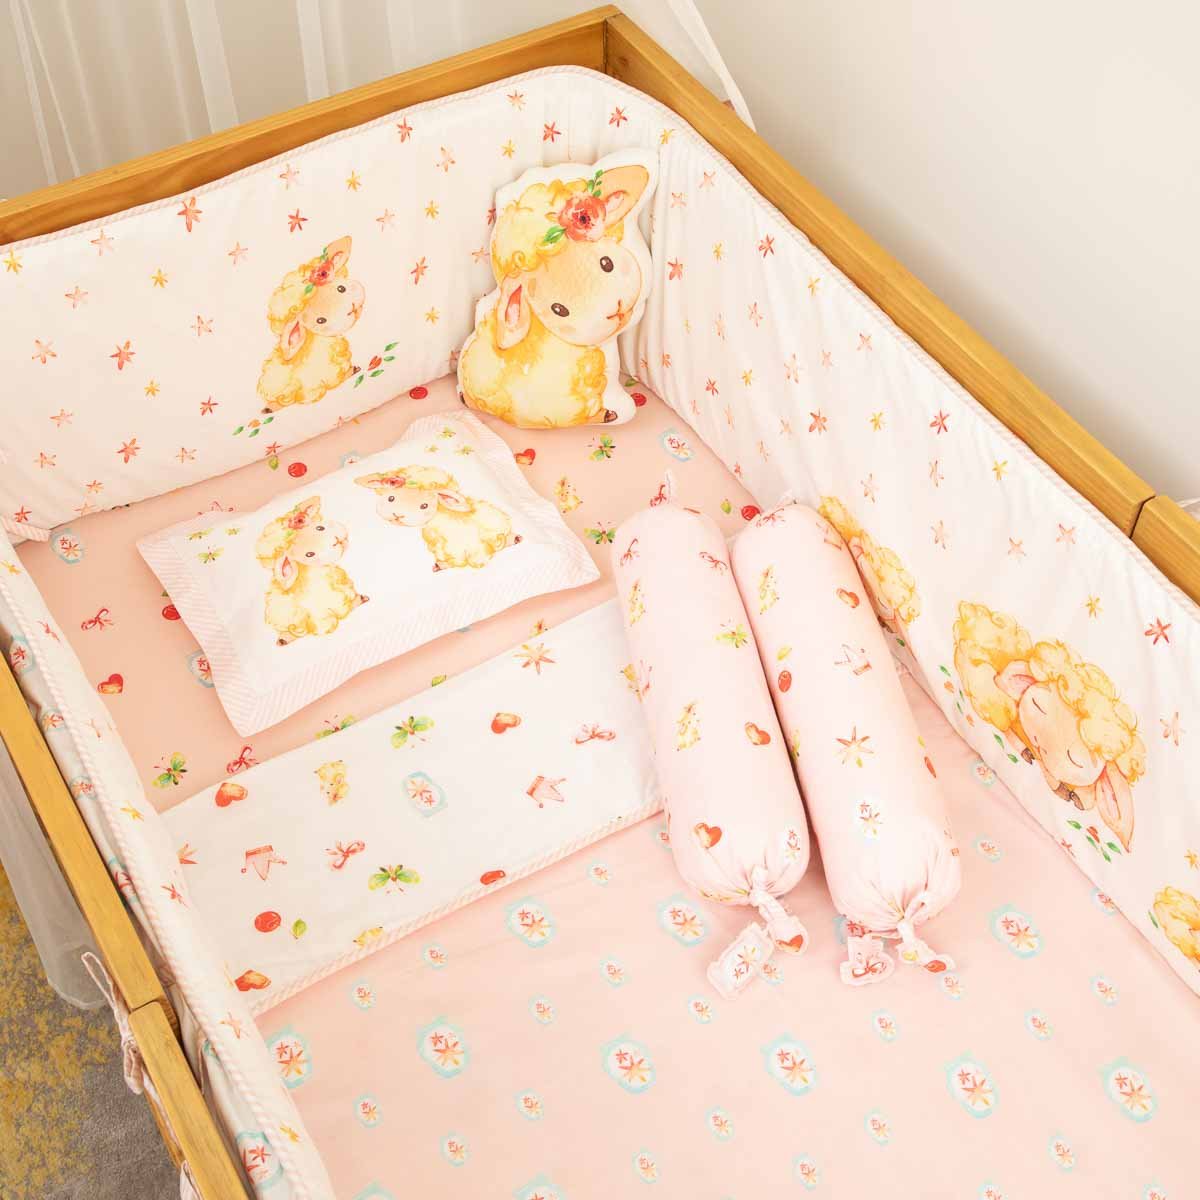 Fluffy the Sheep - Cot Bedding Set with Bumper - Pink